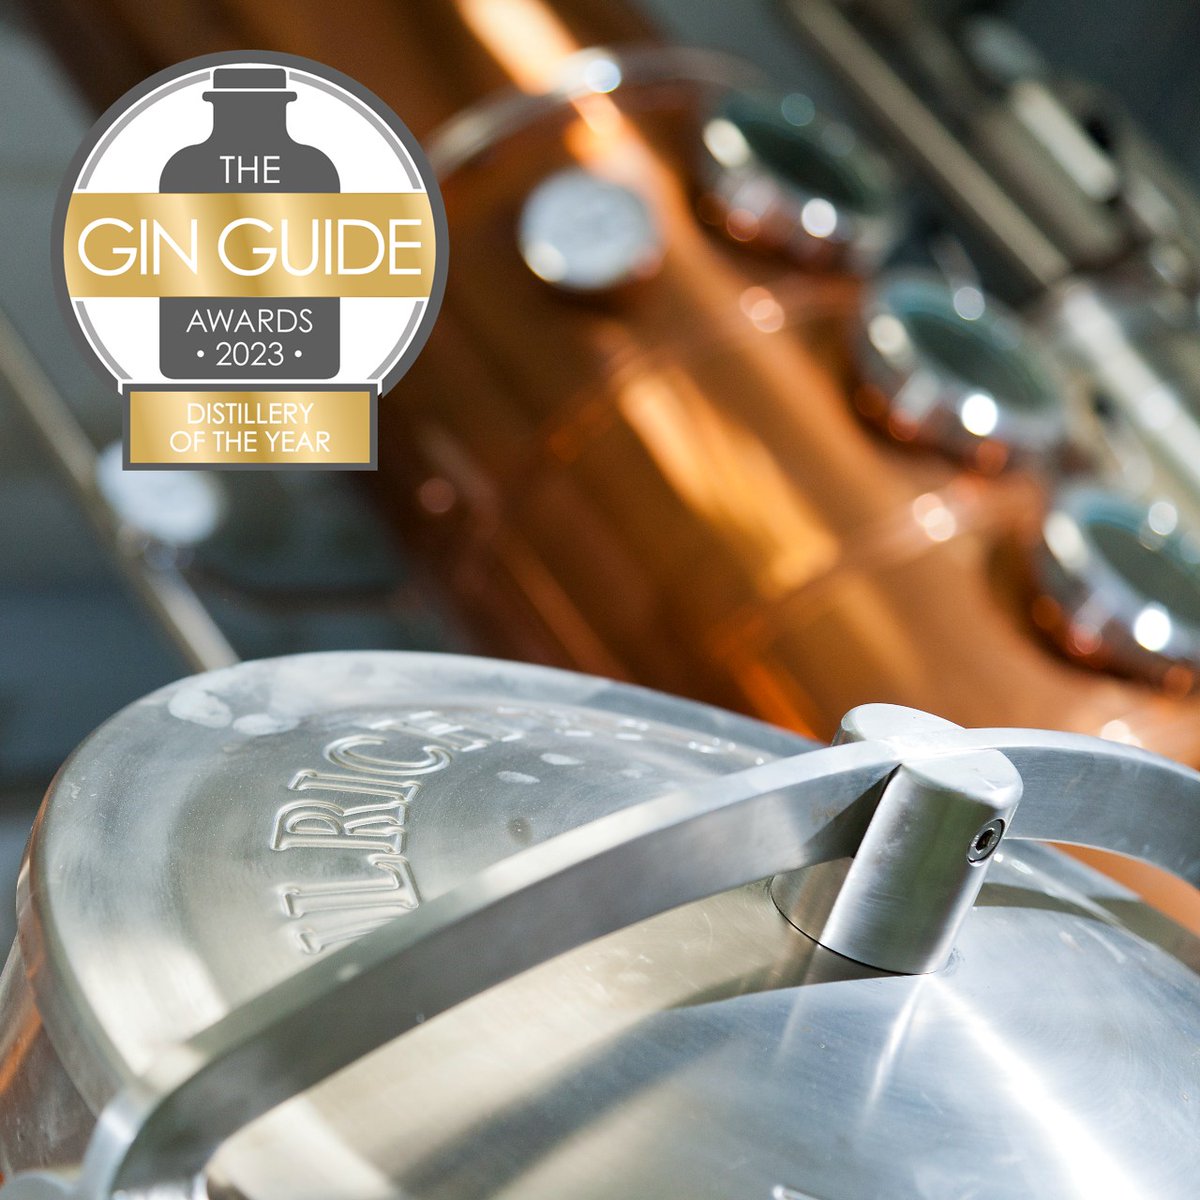 Our still, Hilda, helped us win @theginguide Distillery of the Year 2023. Please join us in thanking her 🥃🥃 #gin #londondrygin #vodka #bourbon #whisky #whiskey #englishwhisky #rum #brandy #calvados #supportlocal #supportsmallbusiness #visitshropshire #visitoswestry